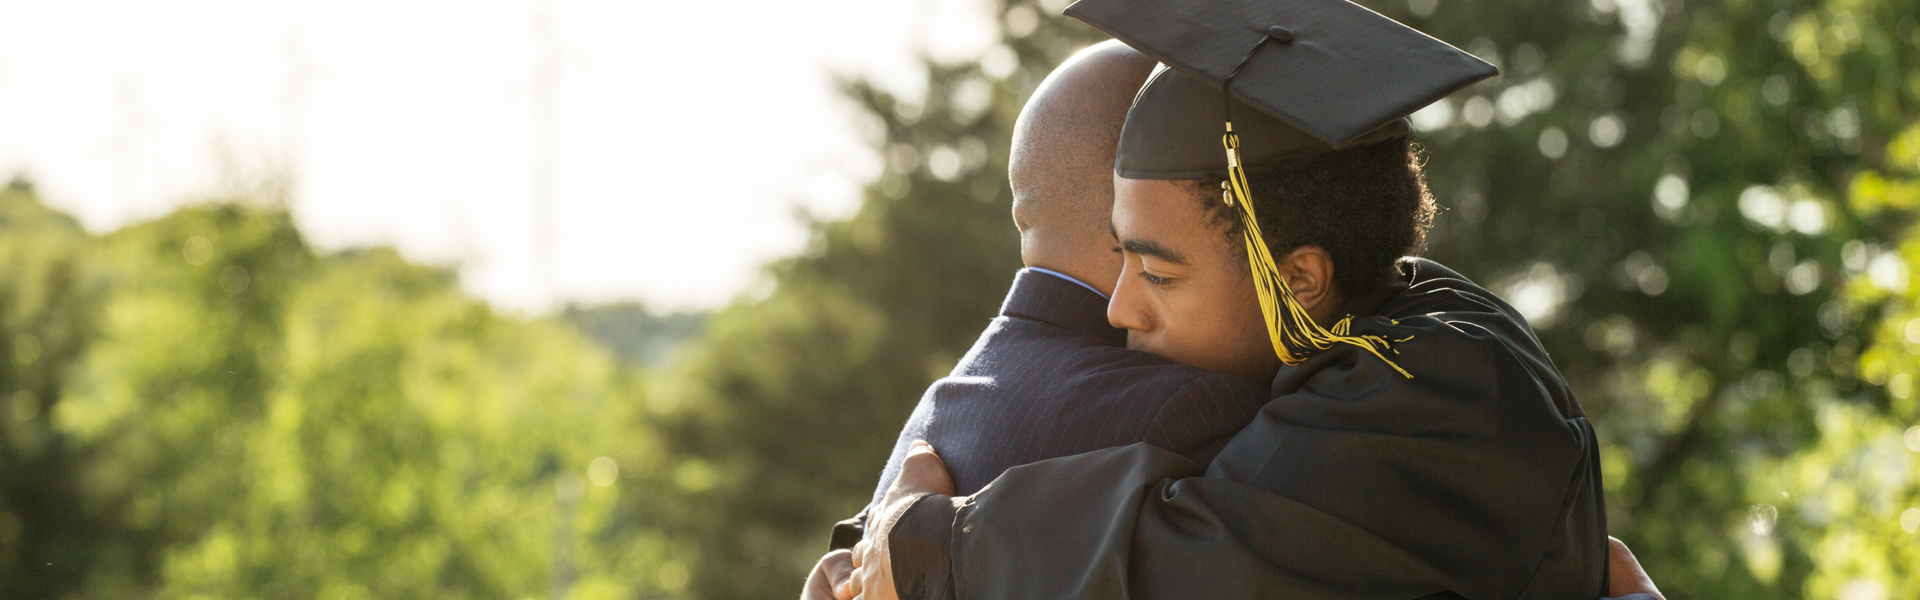 Dressed in his graduation cap and gown, a young man hugs his father and thanks him for the 529 plan that helped pay for his college education.